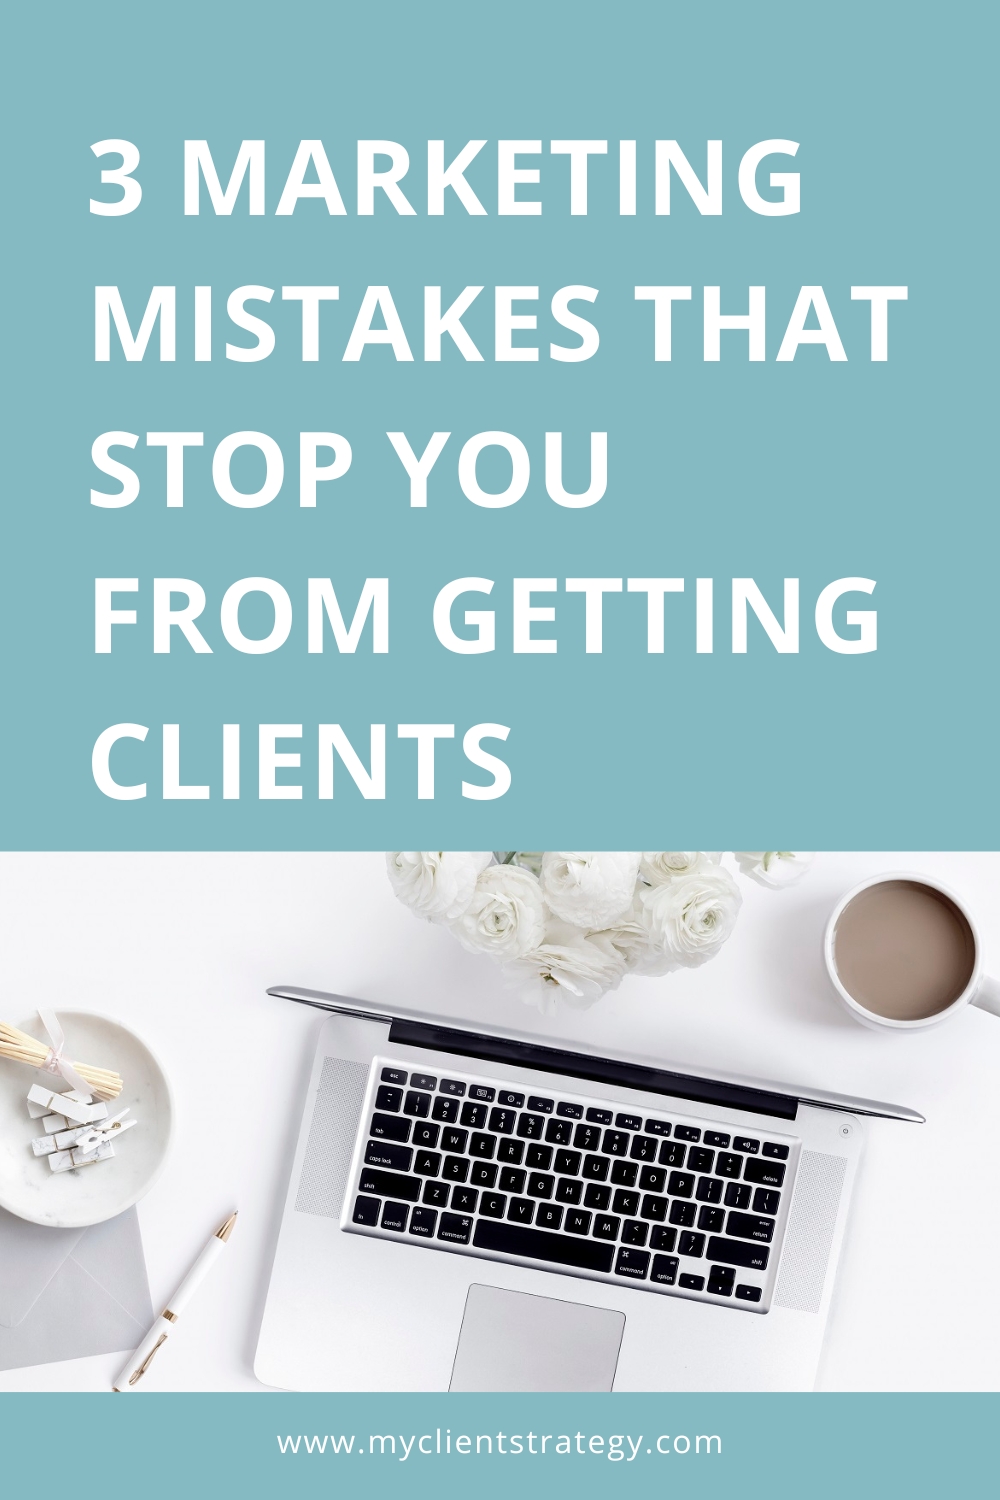 3 marketing mistakes that stop you getting clients